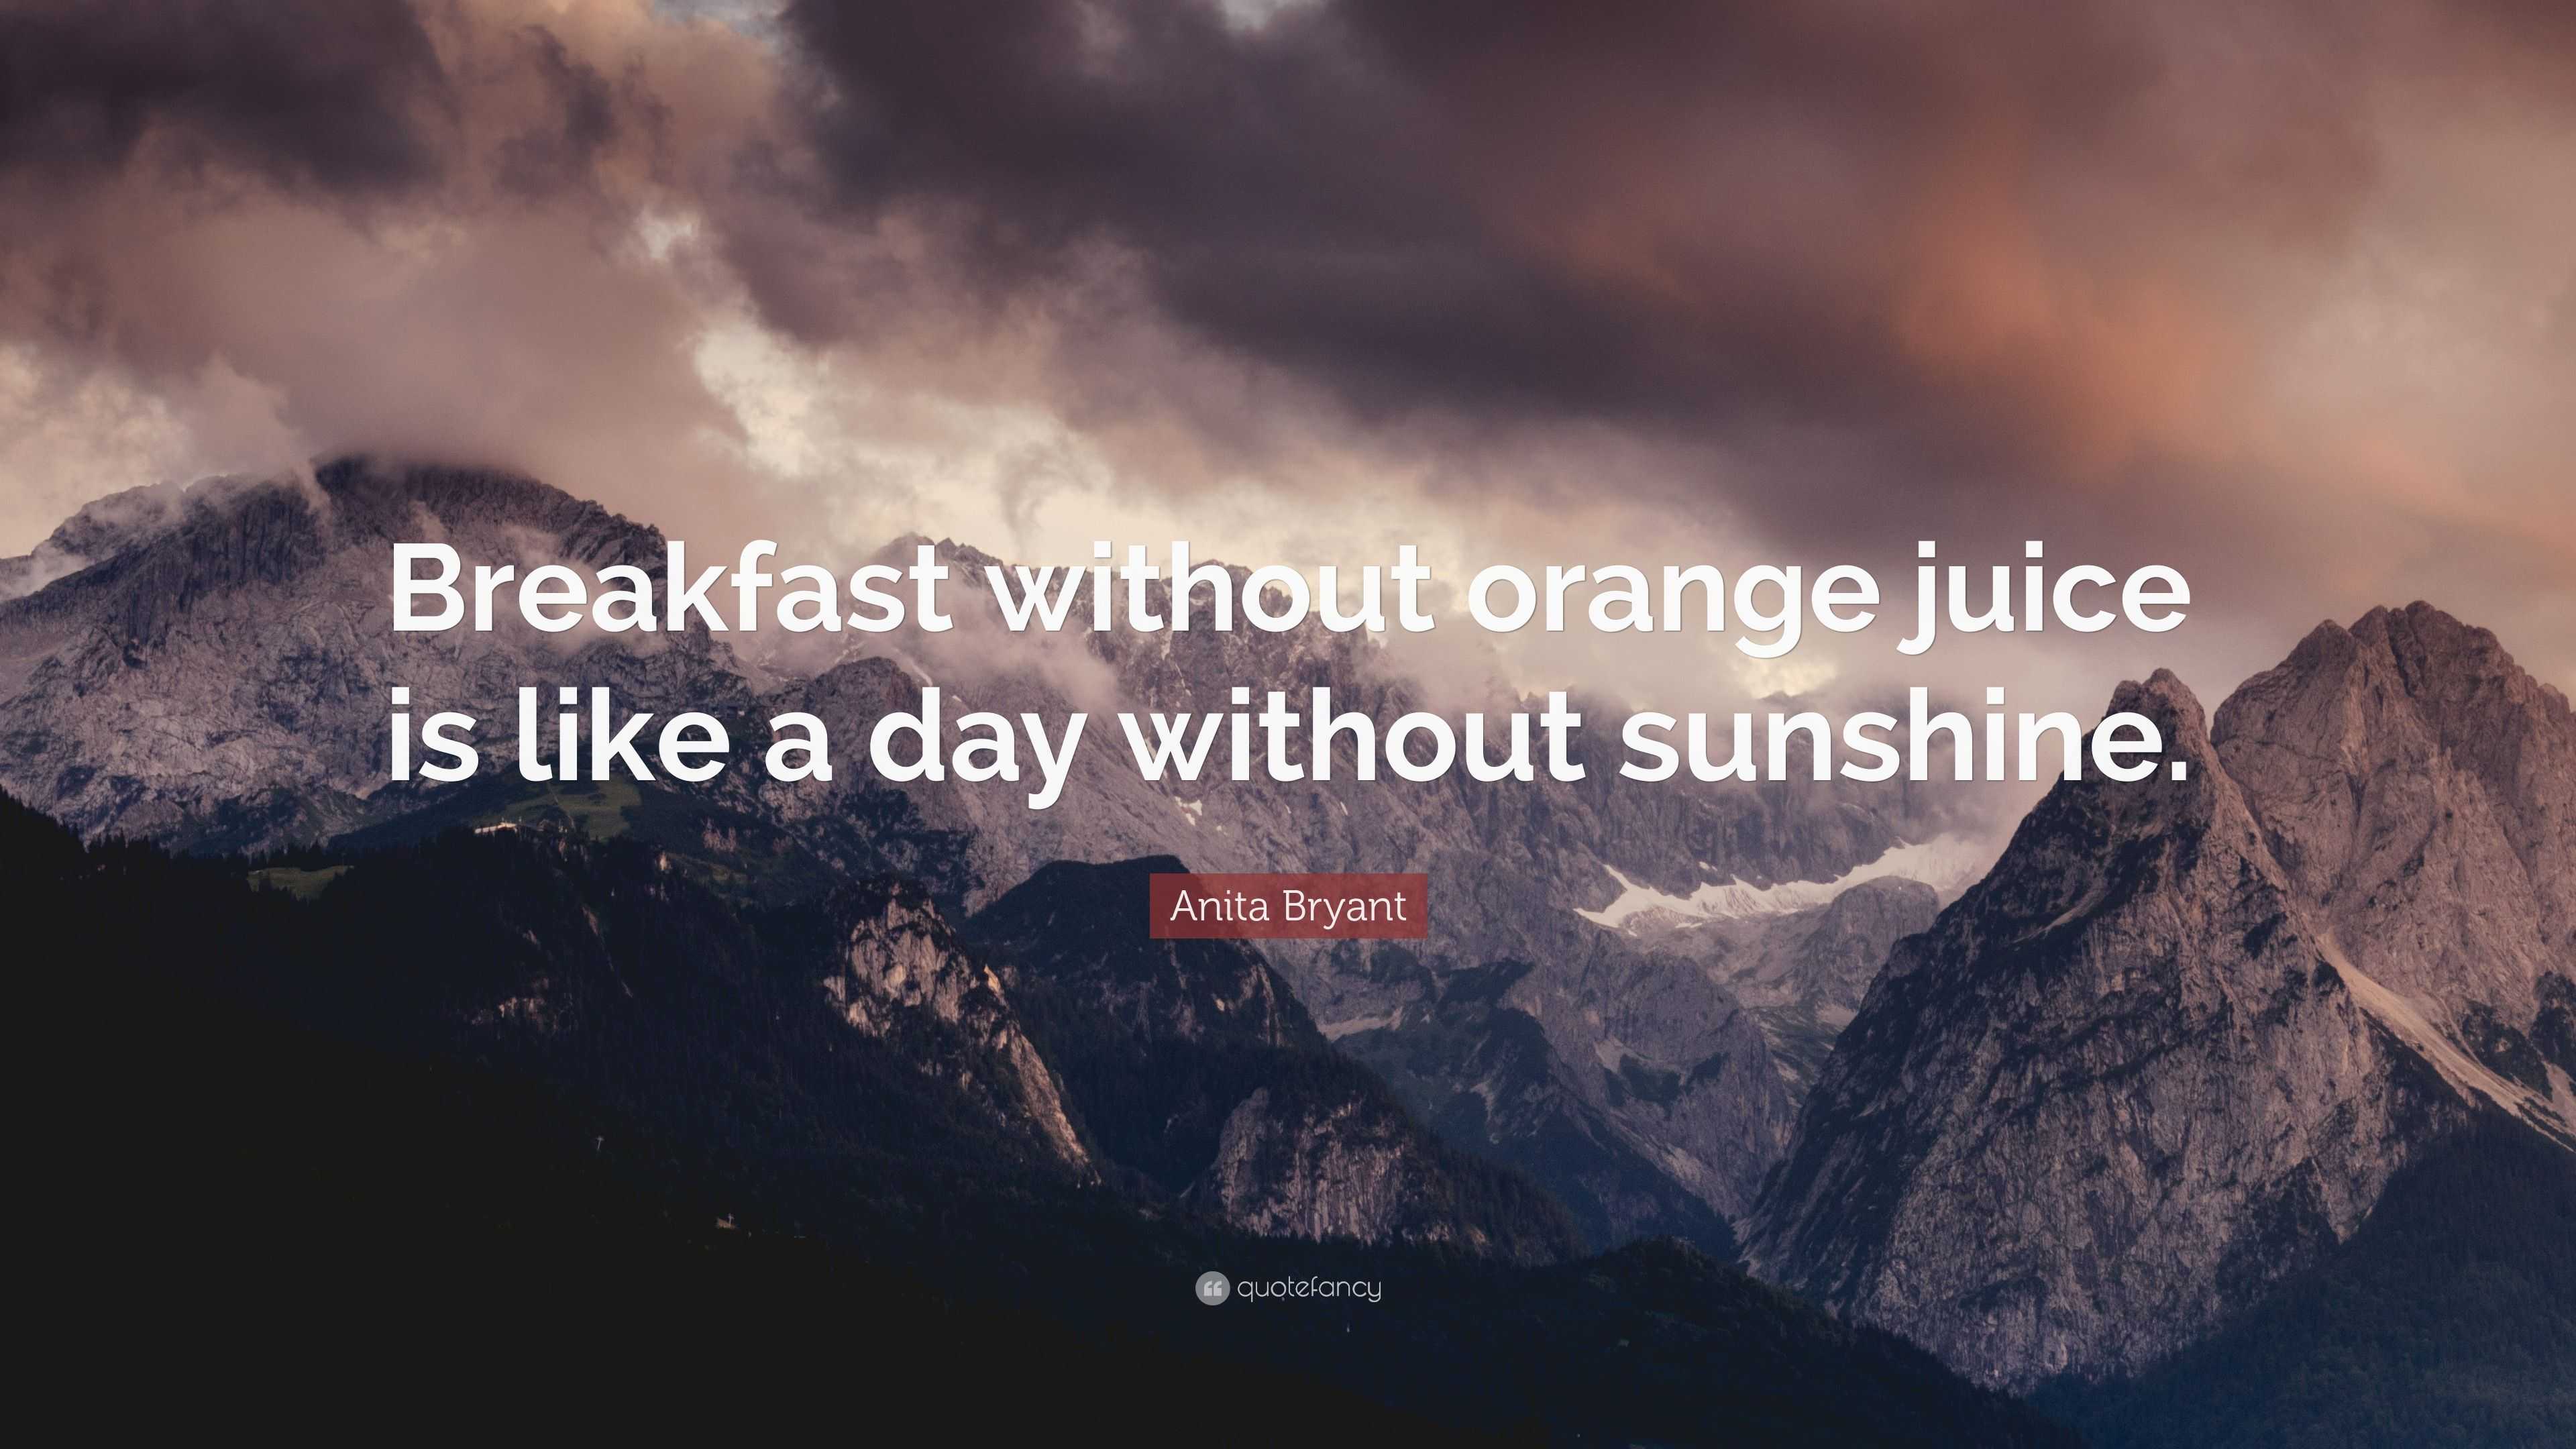 https://quotefancy.com/media/wallpaper/3840x2160/2346682-Anita-Bryant-Quote-Breakfast-without-orange-juice-is-like-a-day.jpg